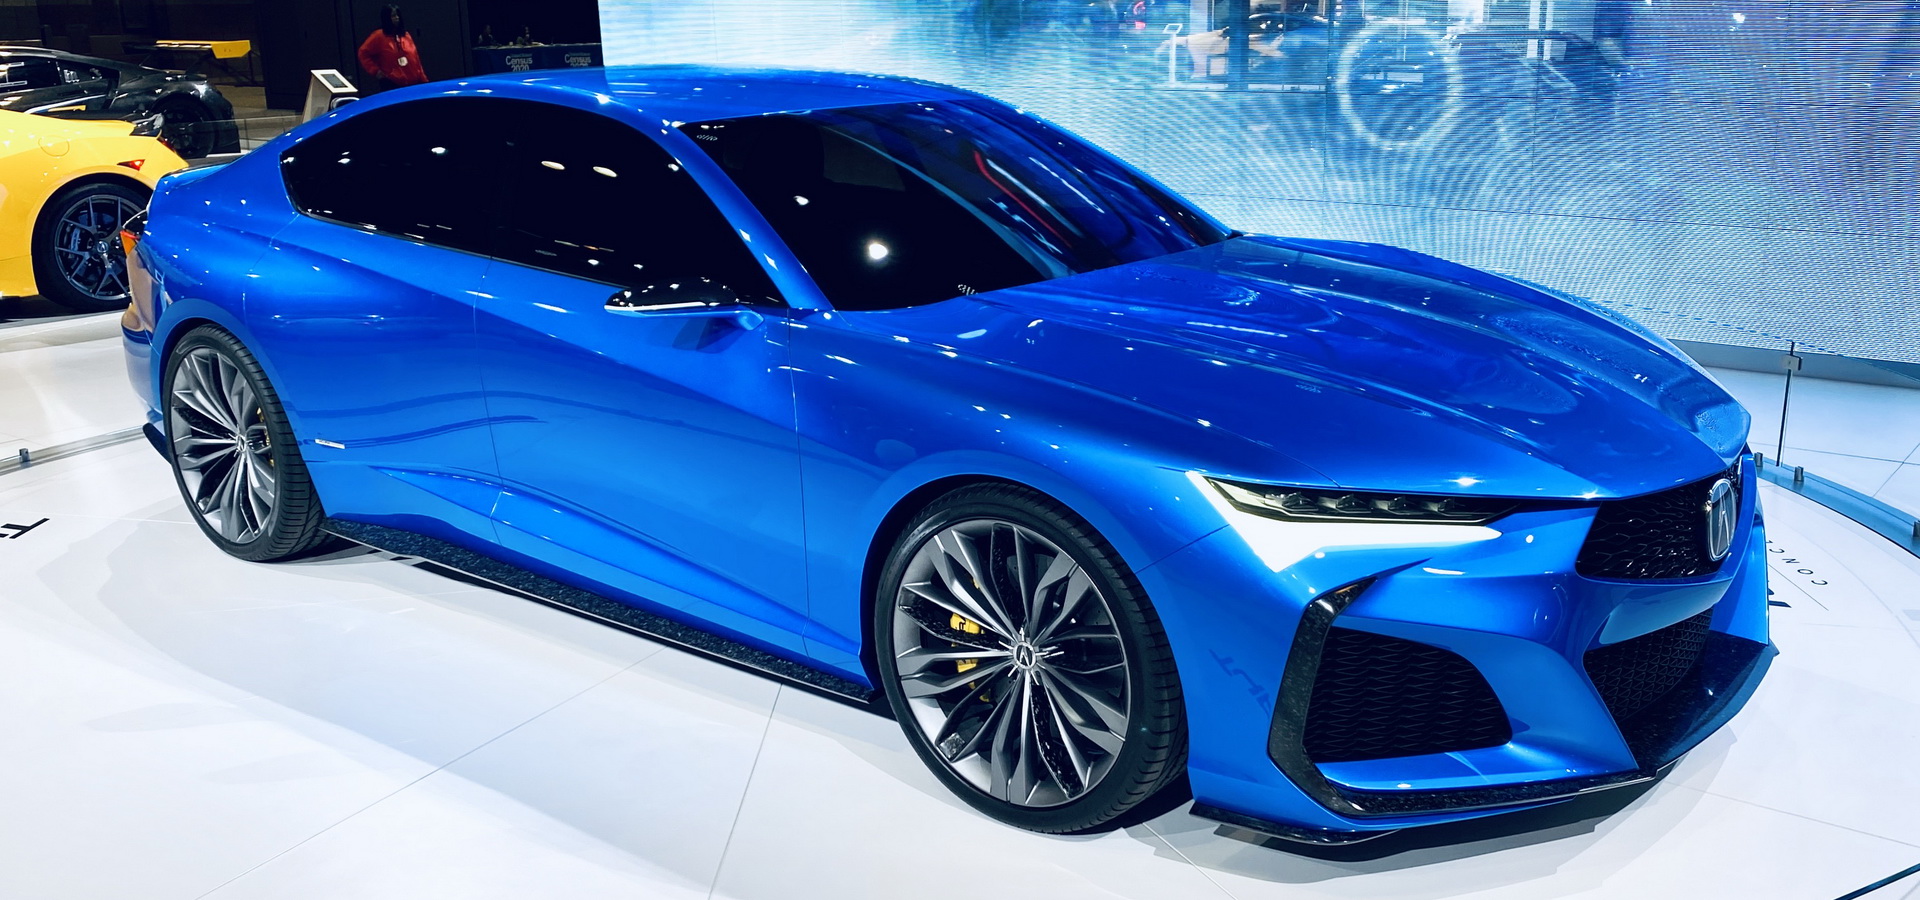 Acura's Type S Concept Is Proof That Fastbacks Are The Future